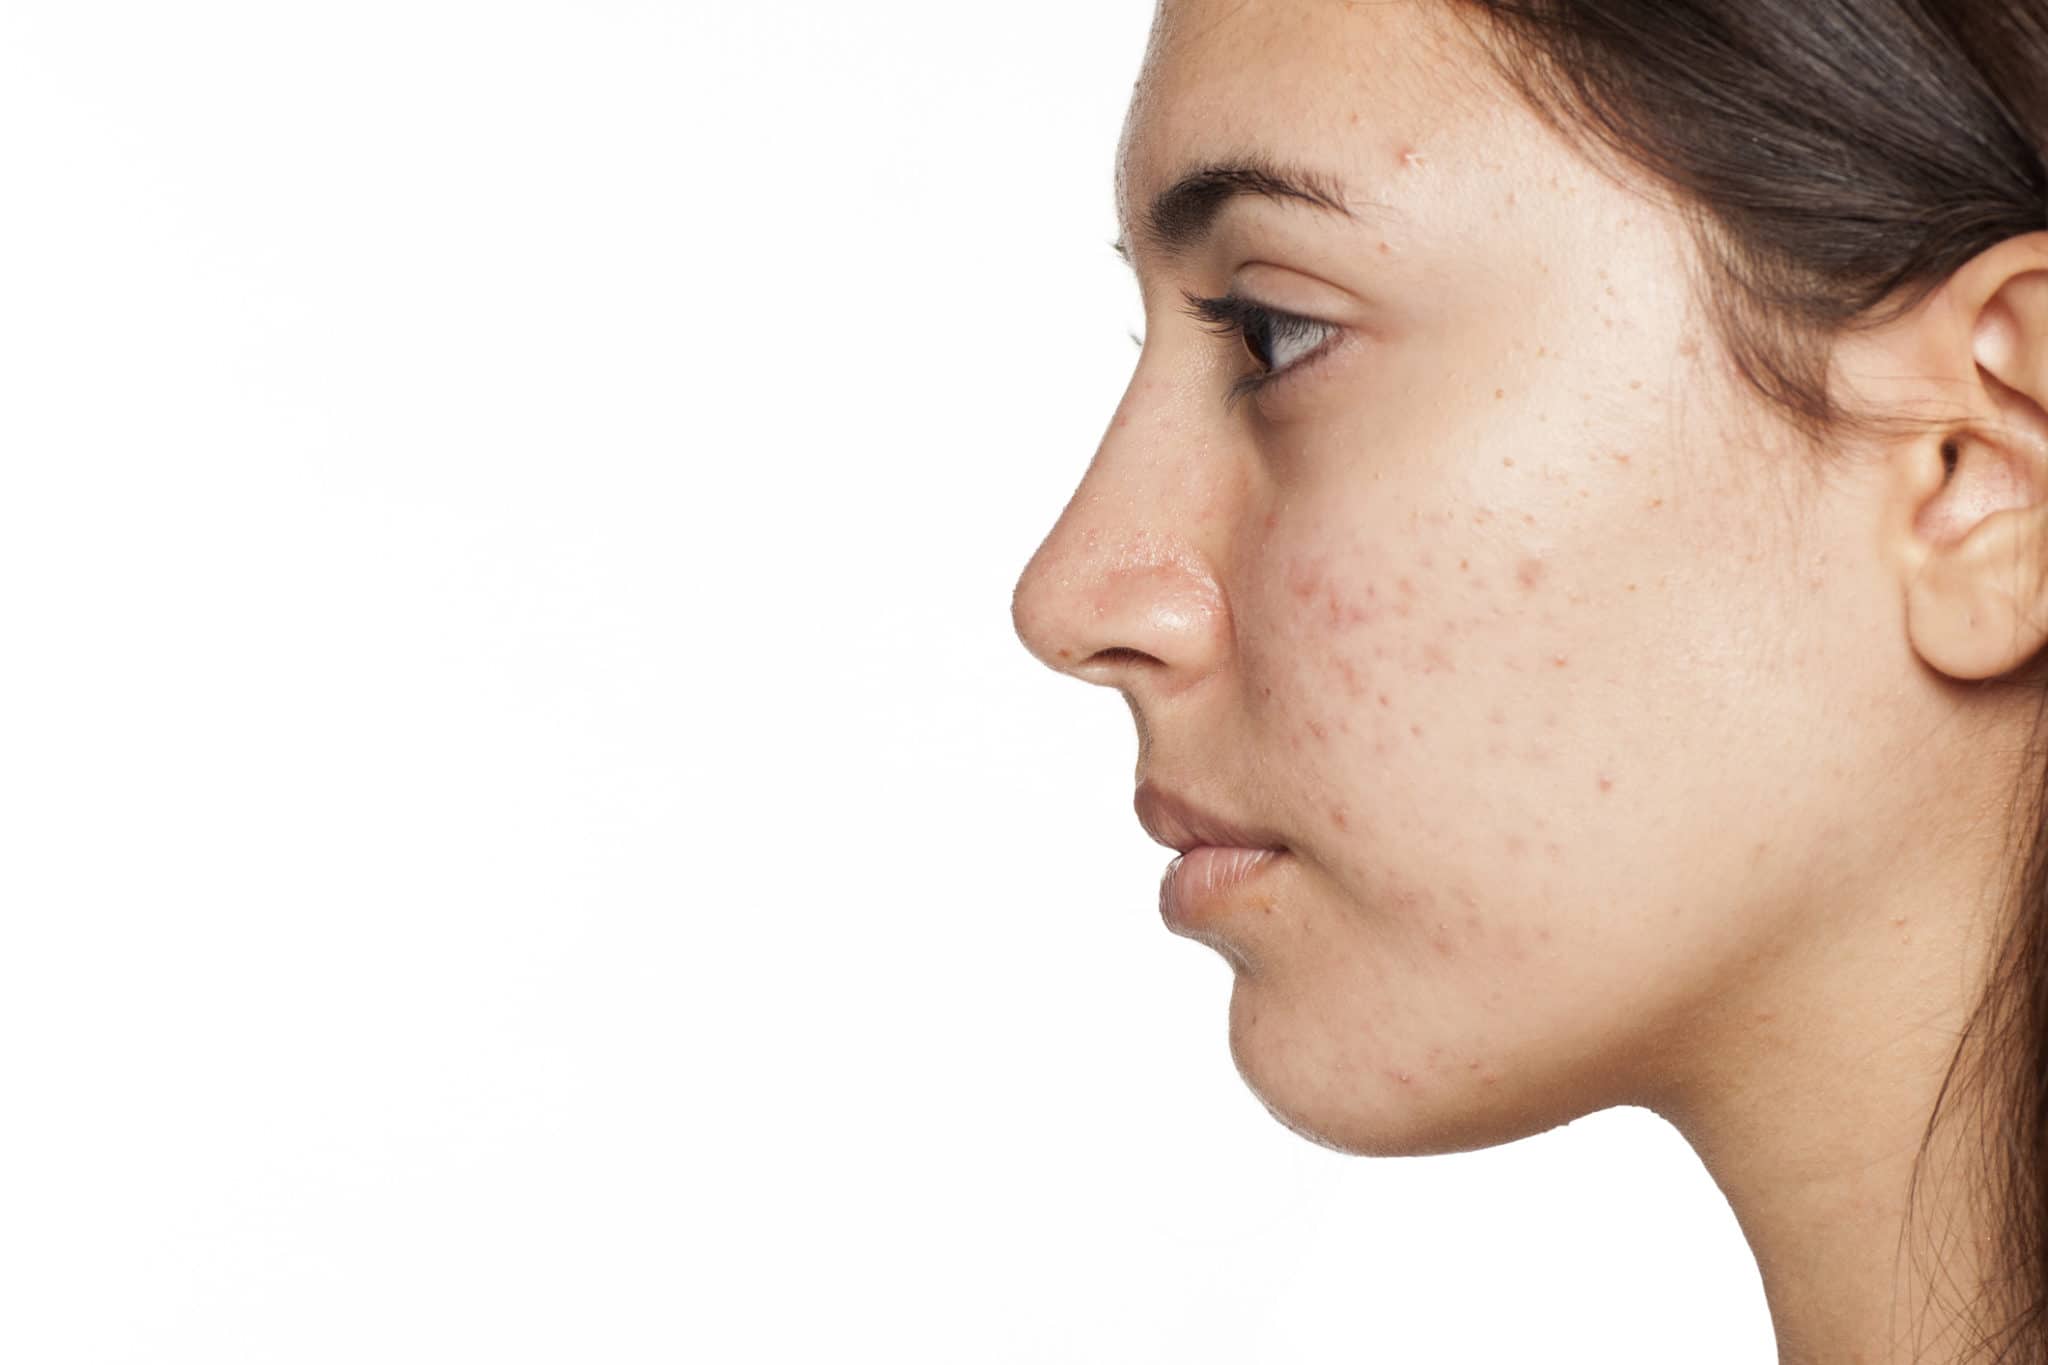 Profile of young girl with acne